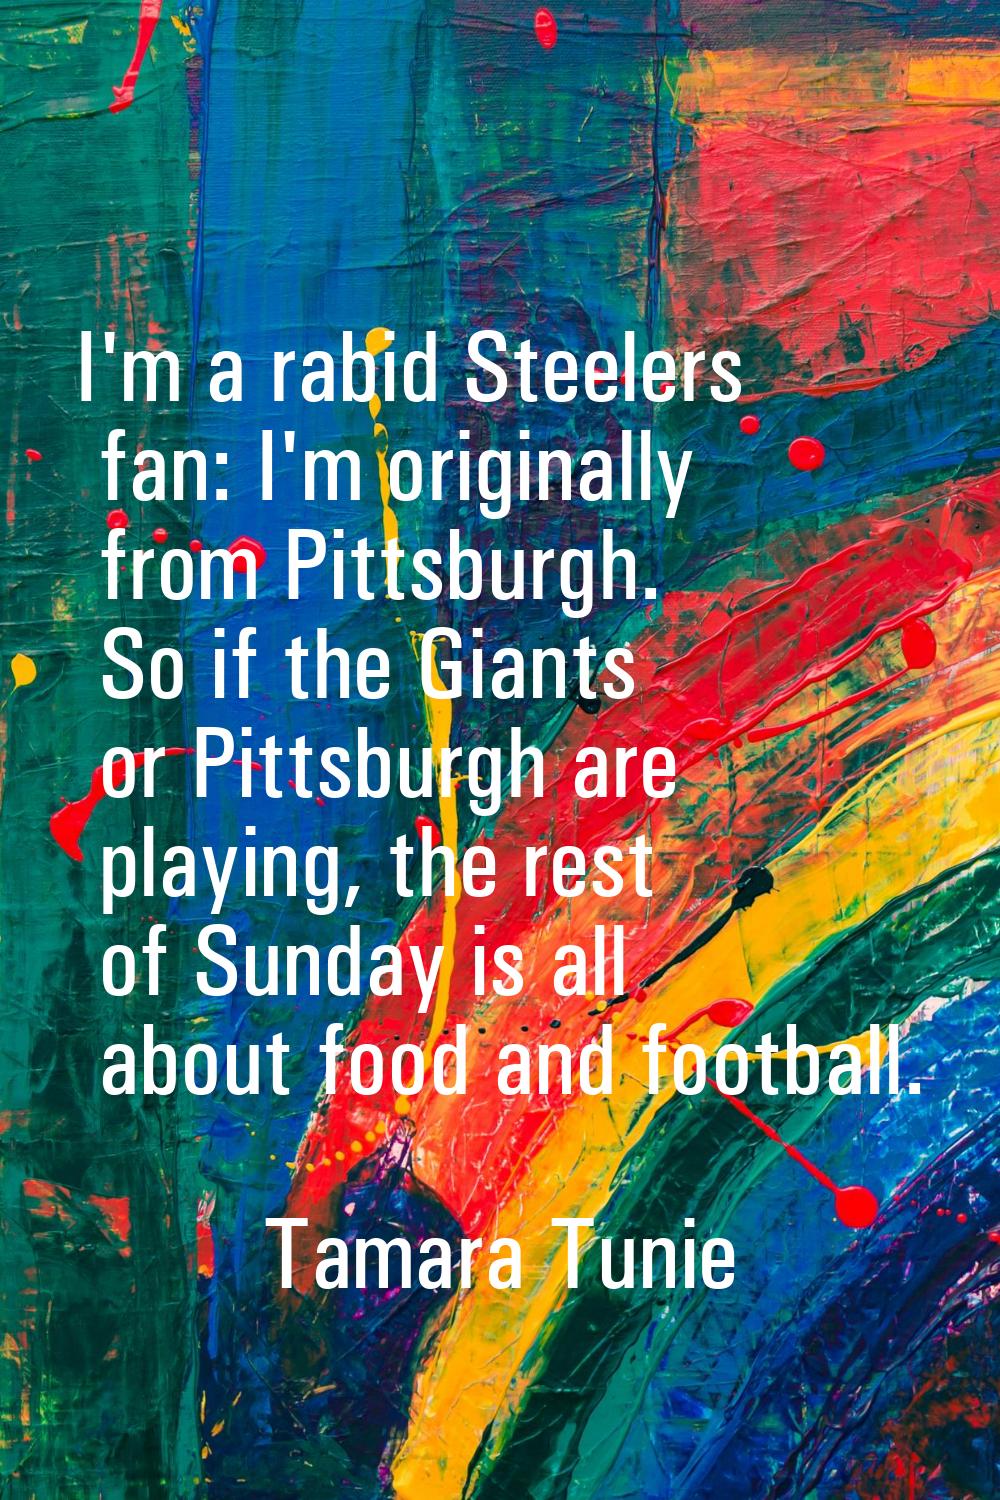 I'm a rabid Steelers fan: I'm originally from Pittsburgh. So if the Giants or Pittsburgh are playin